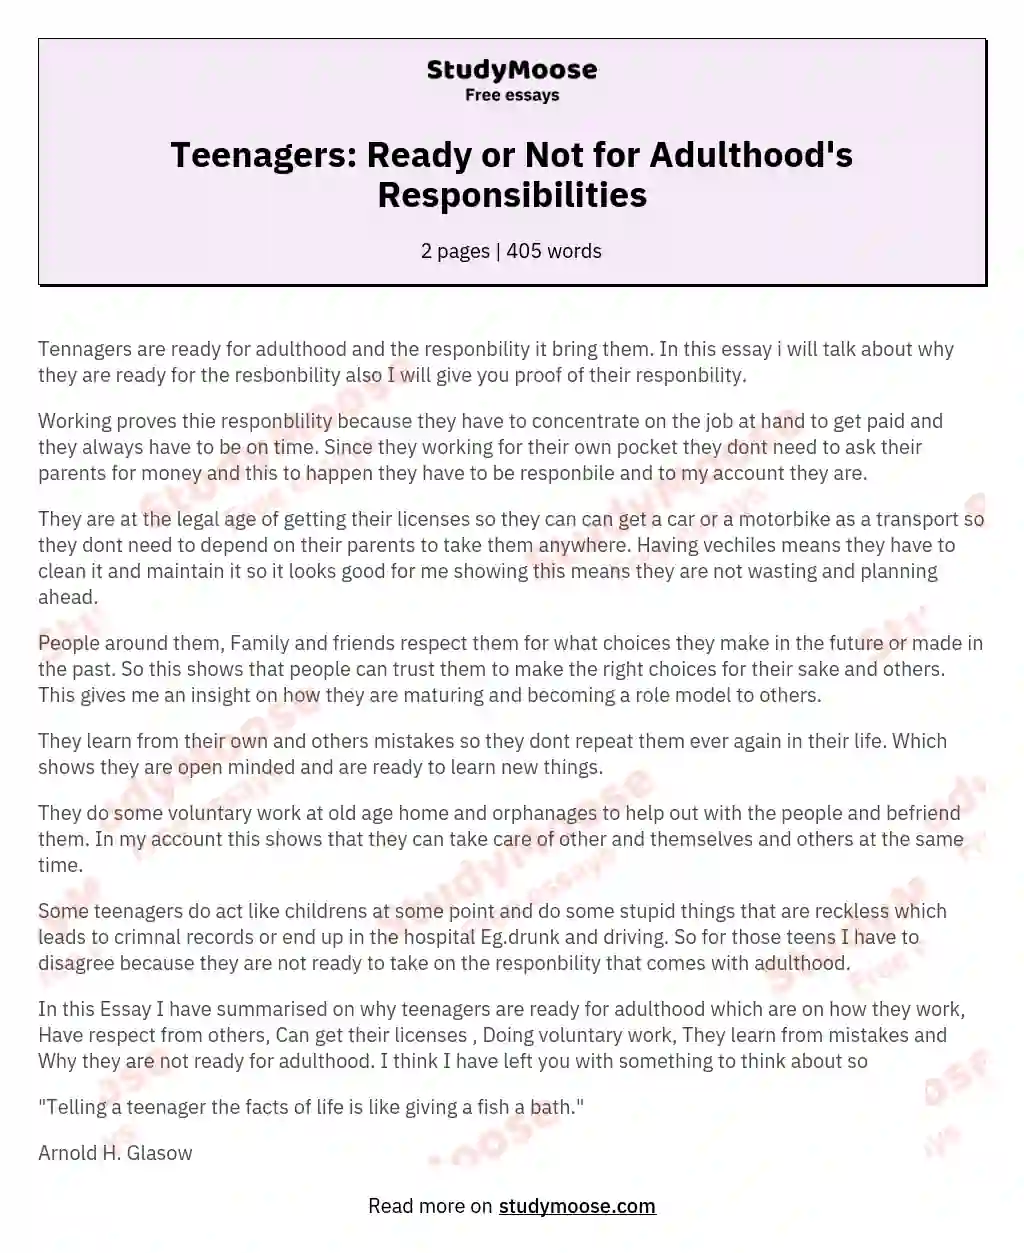 Teenagers: Ready or Not for Adulthood's Responsibilities essay